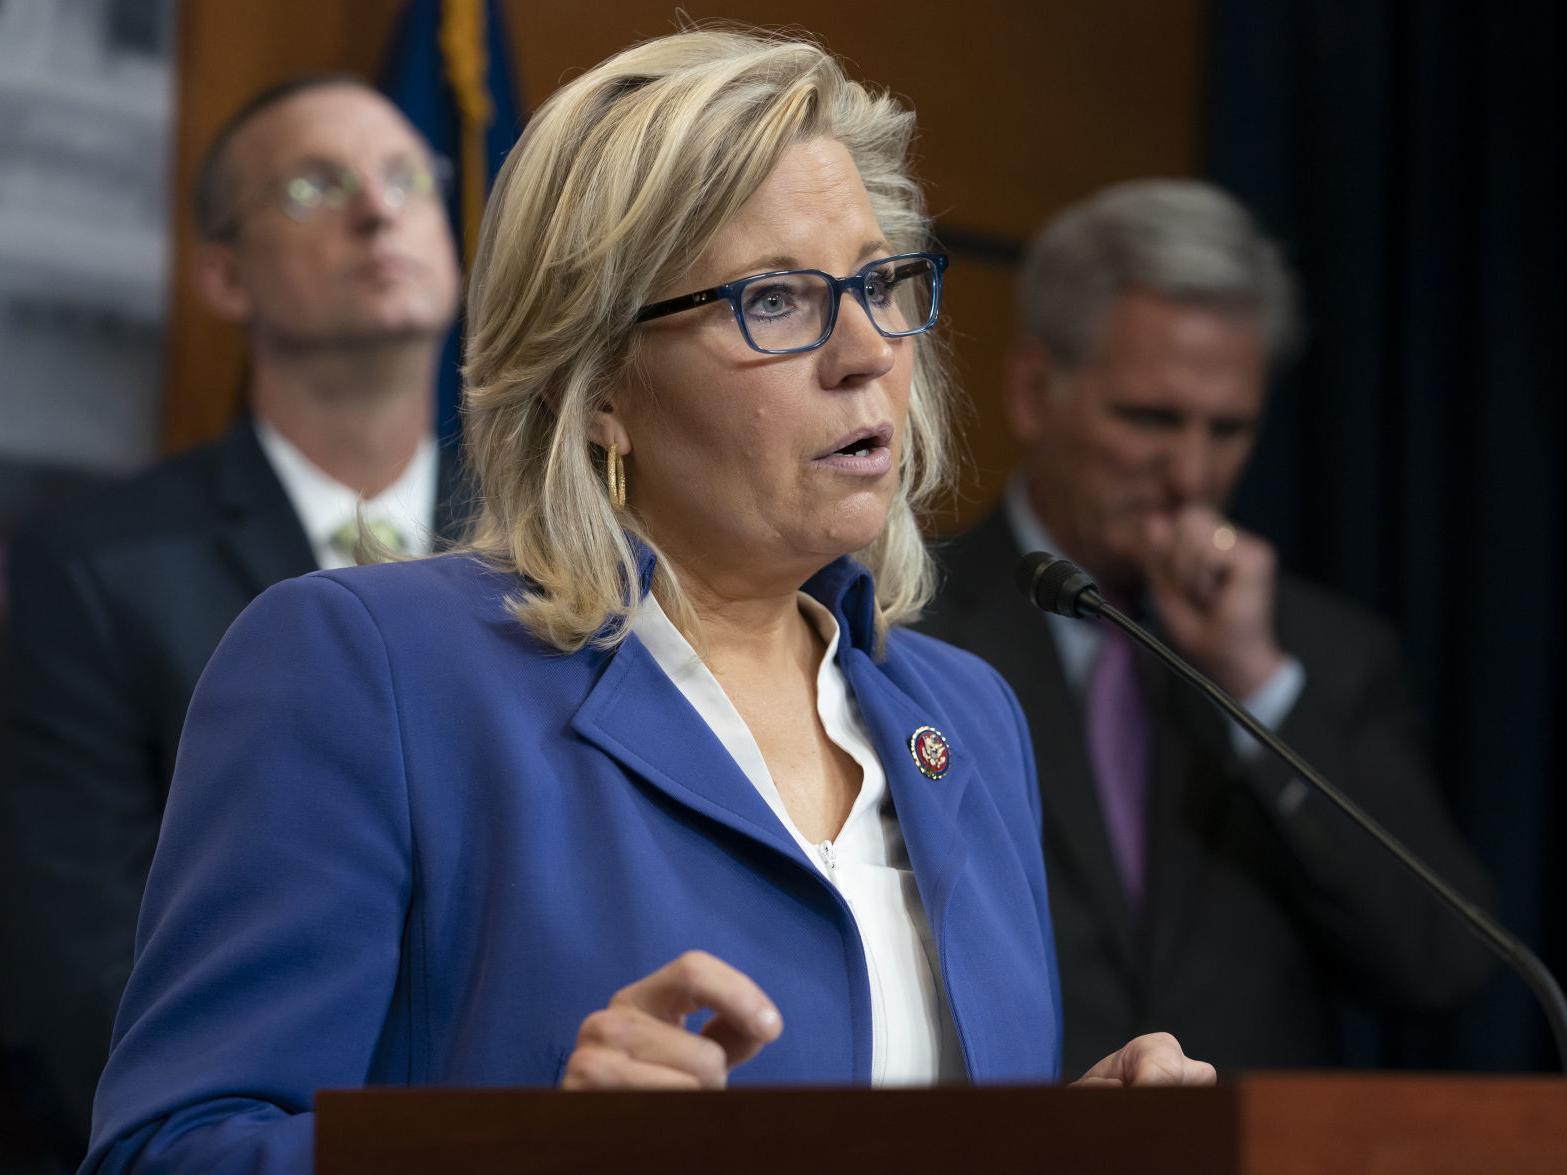 Poll shows Liz Cheney leading Cynthia Lummis by 20 points in a hypothetical  matchup | 307 Politics | trib.com